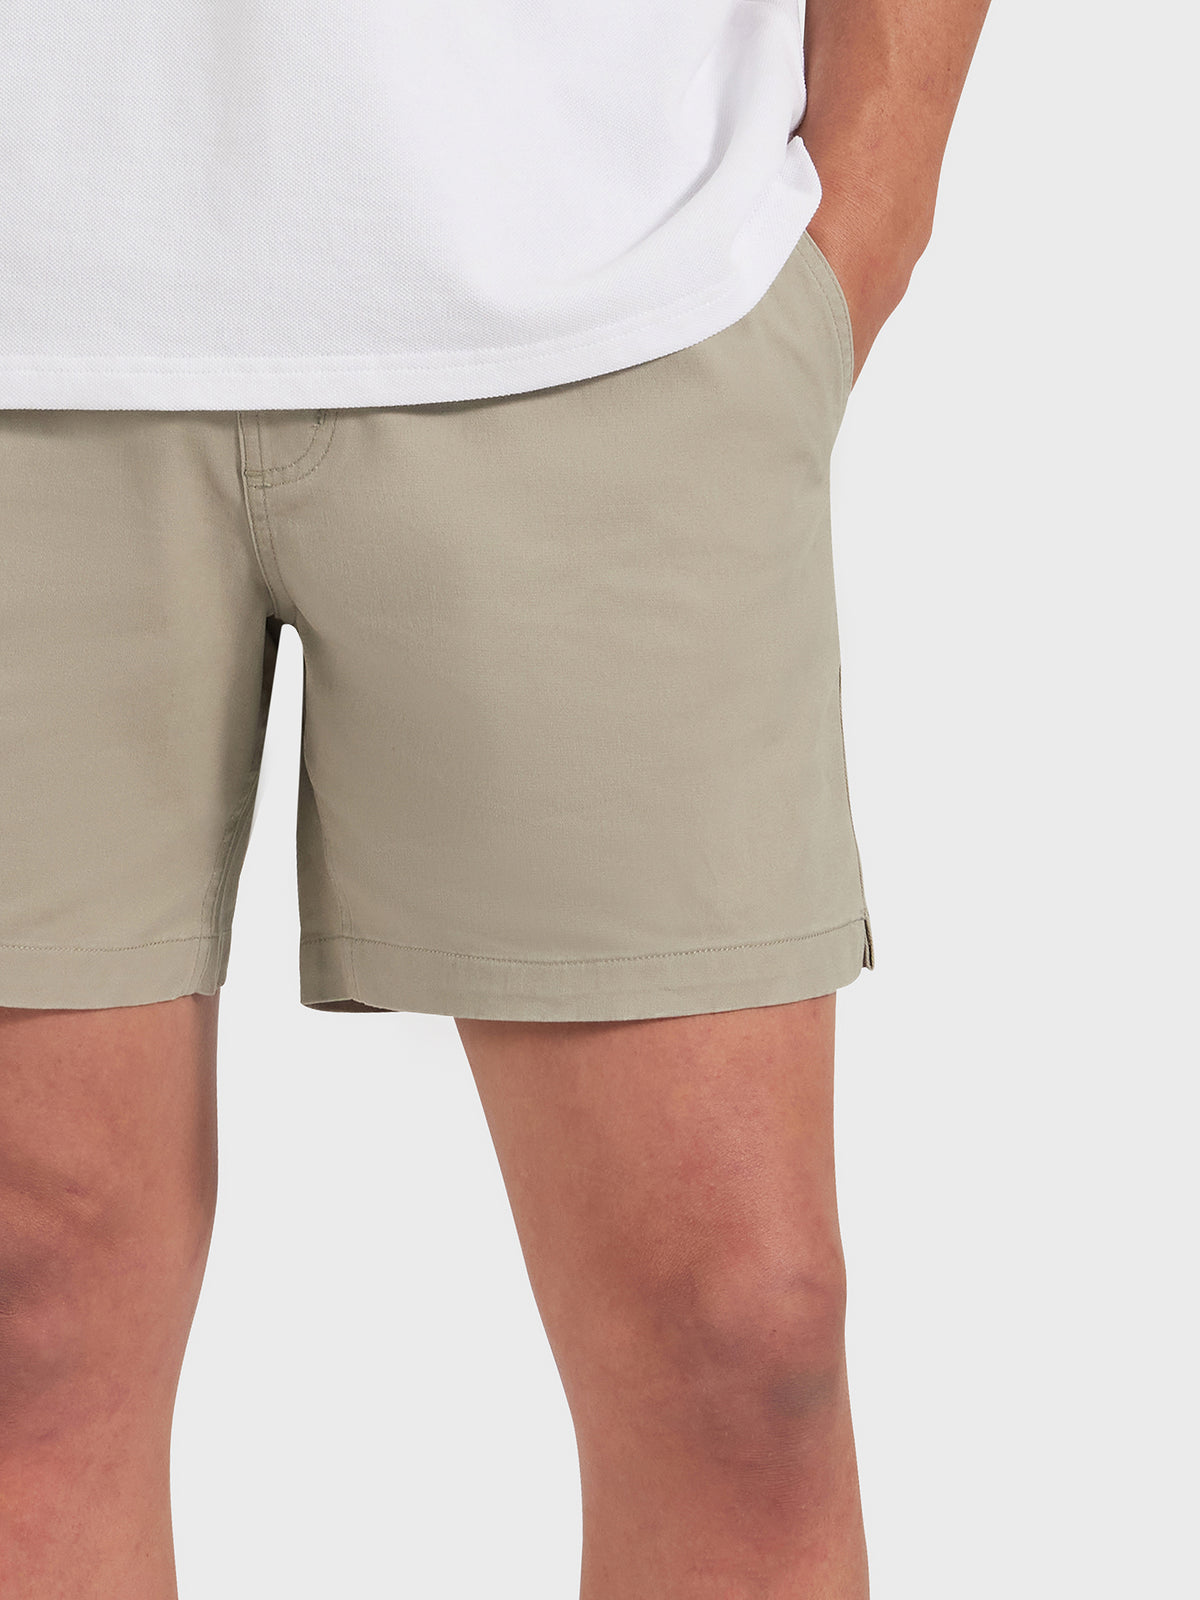 Volley Shorts in Dusty Olive